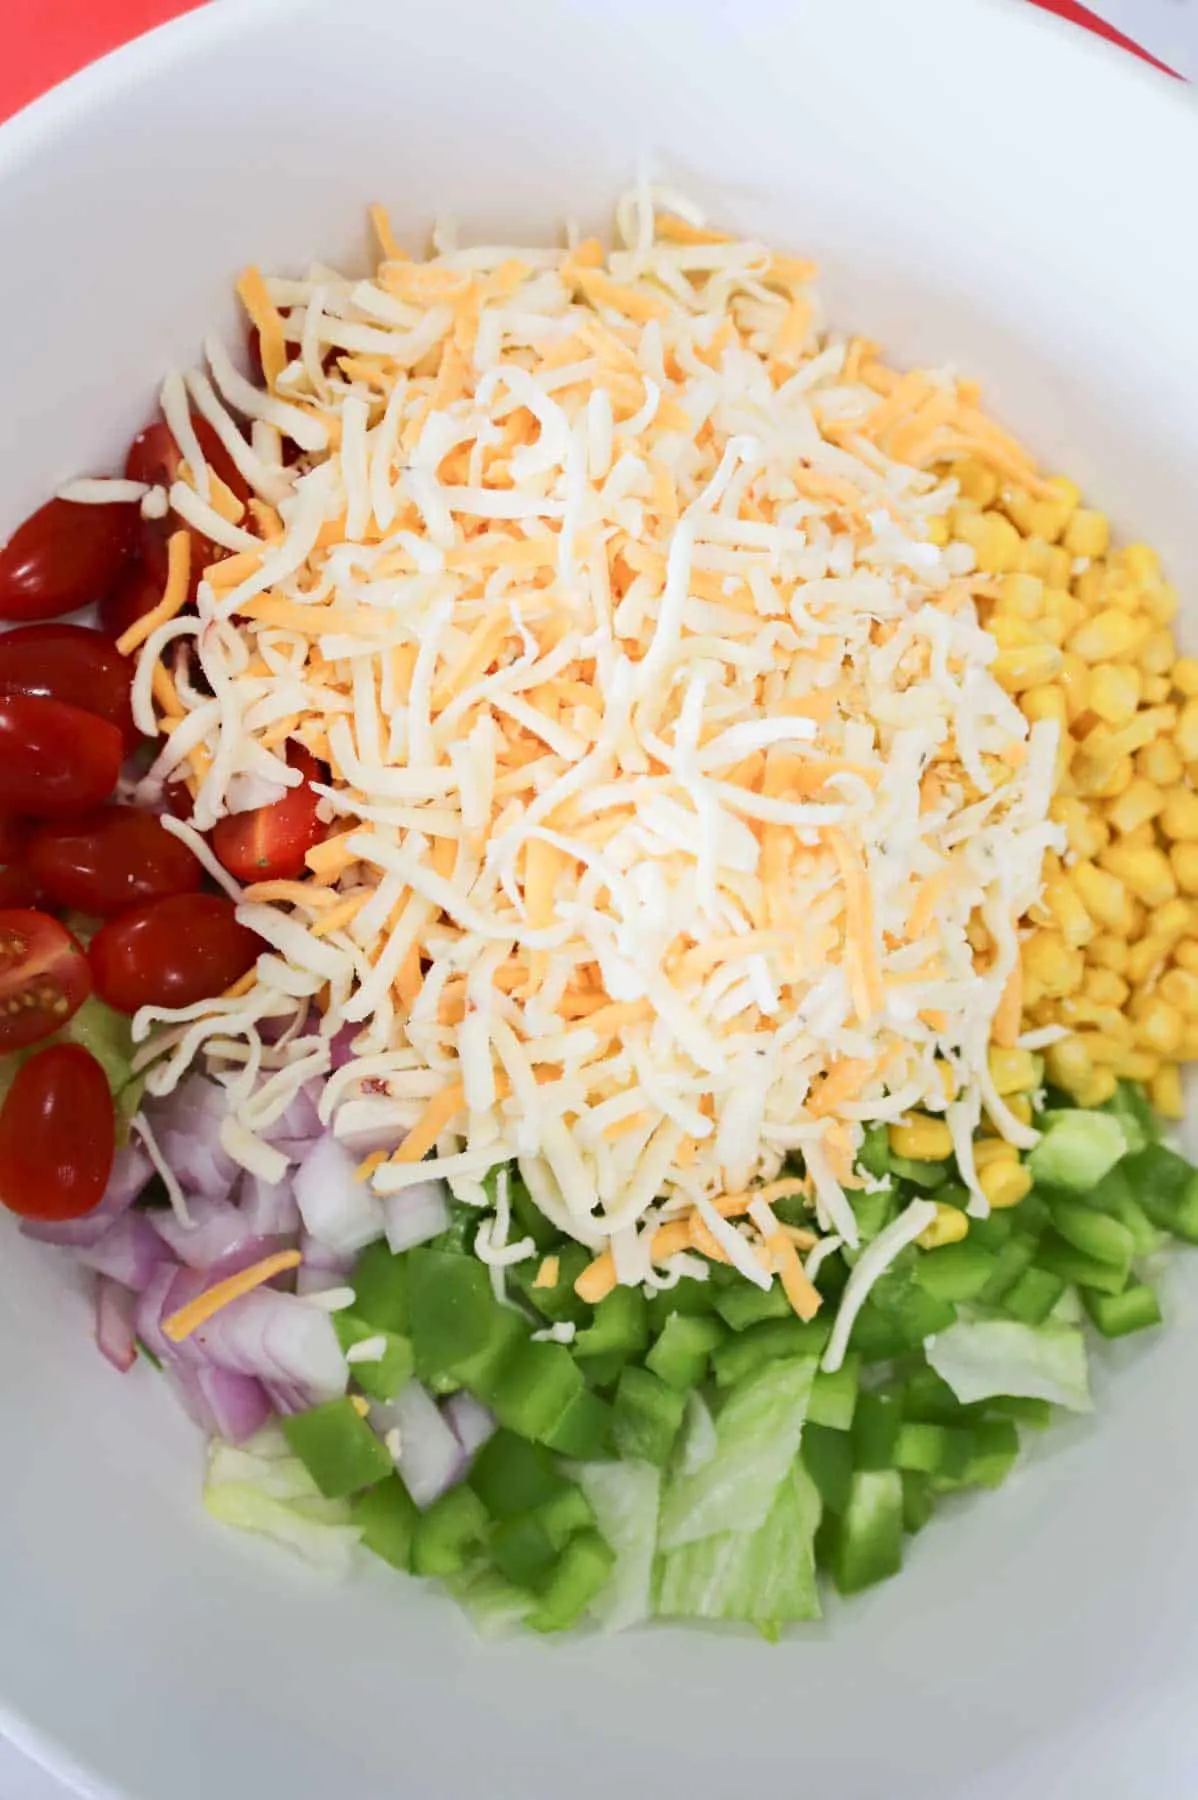 shredded cheese, tomatoes, peppers, onions and corn on top of lettuce in a bowl